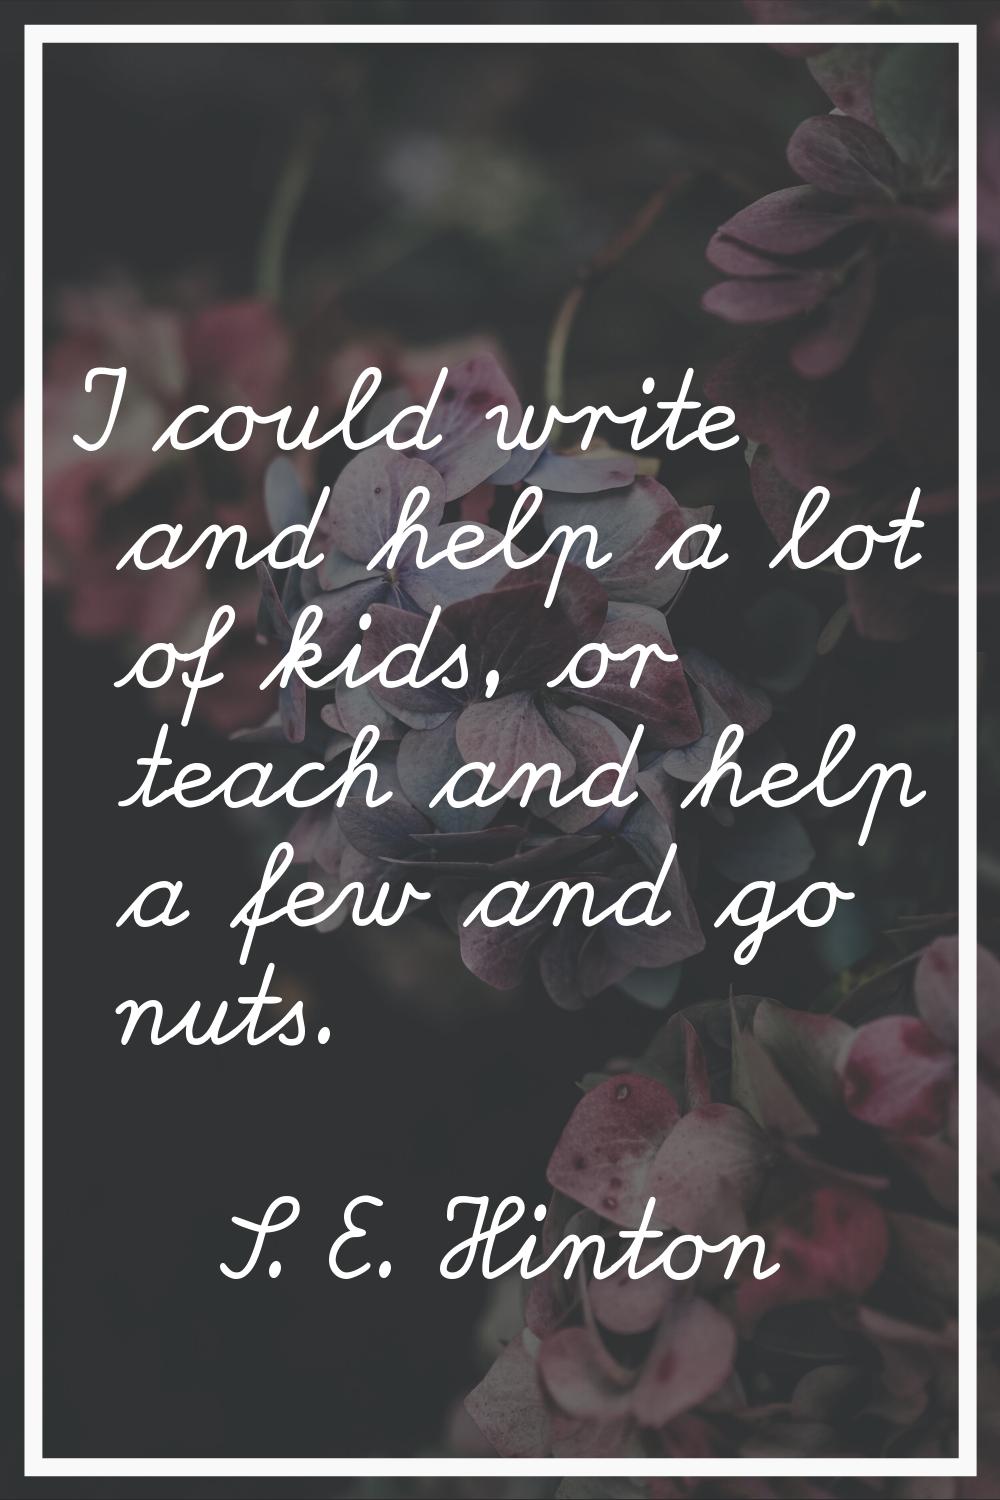 I could write and help a lot of kids, or teach and help a few and go nuts.